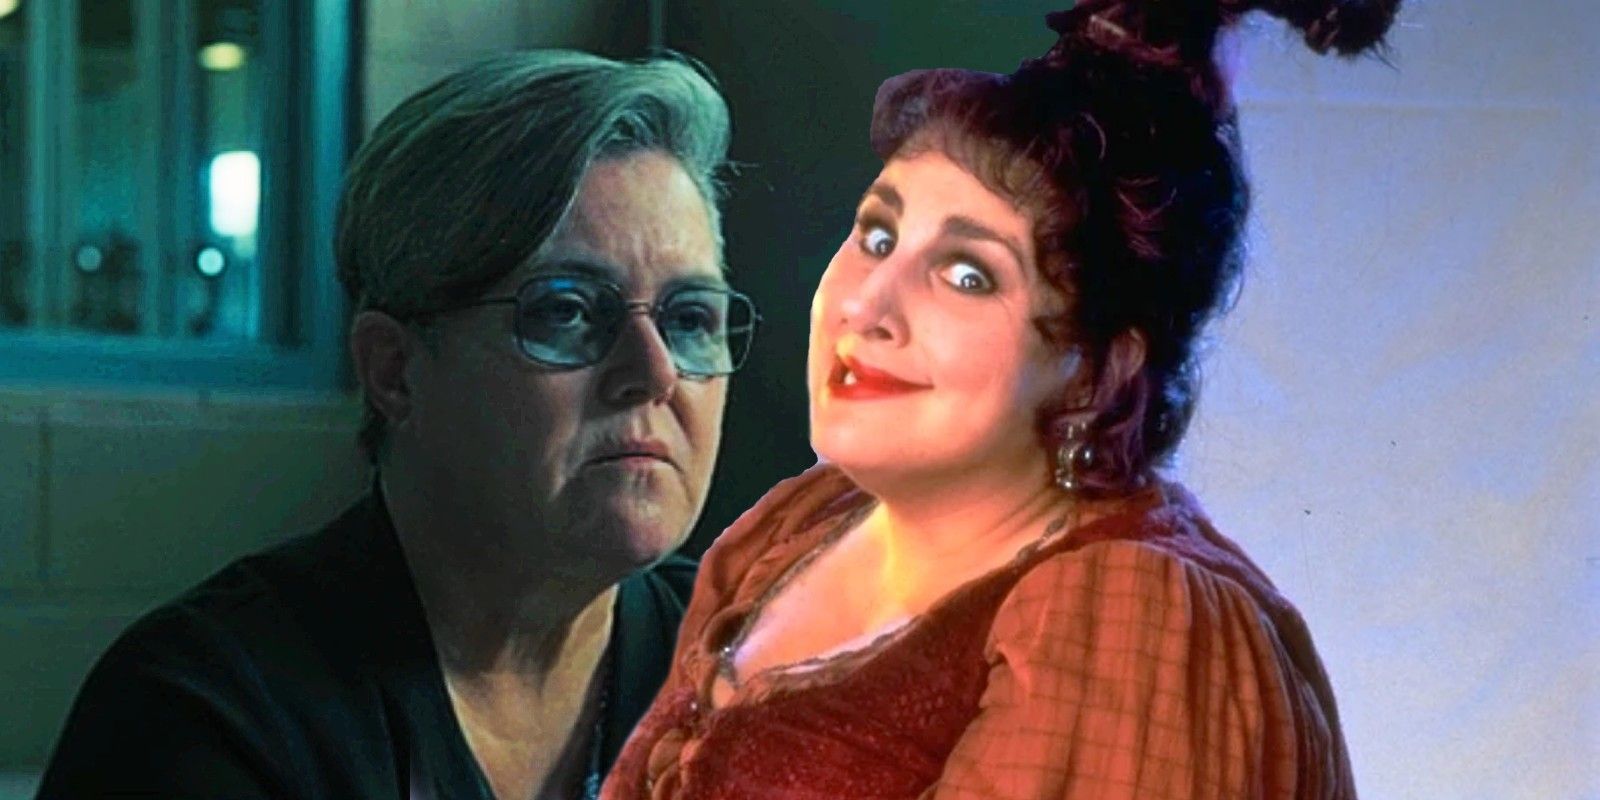 Custom image of Rosie O'Donnell and Mary from Hocus Pocus